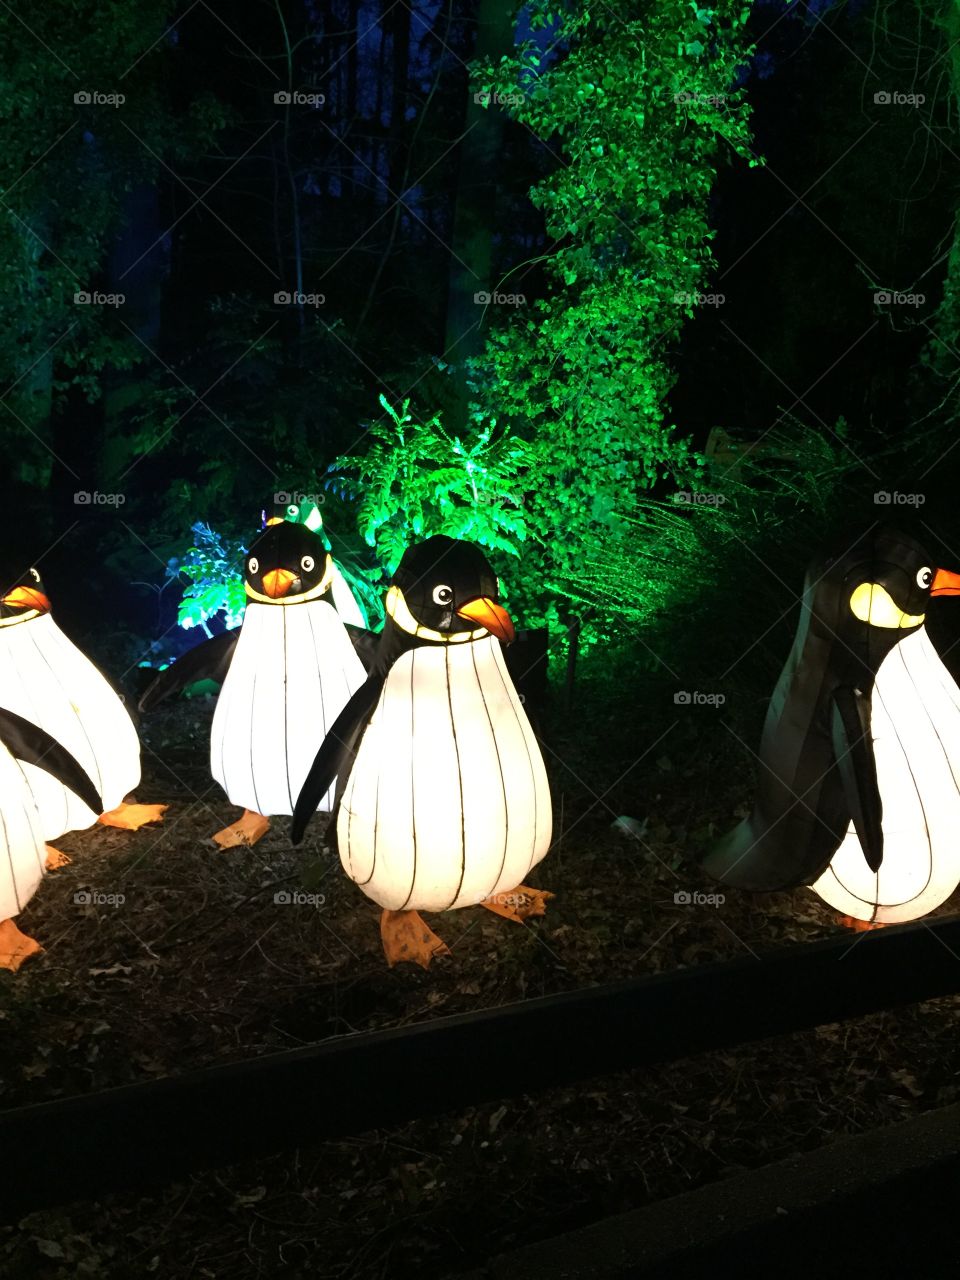 Illuminated pinguins in the bushes. This photo is taken at the zoo at a special "illuminated" evening where you find all kind of l"light giving" animals